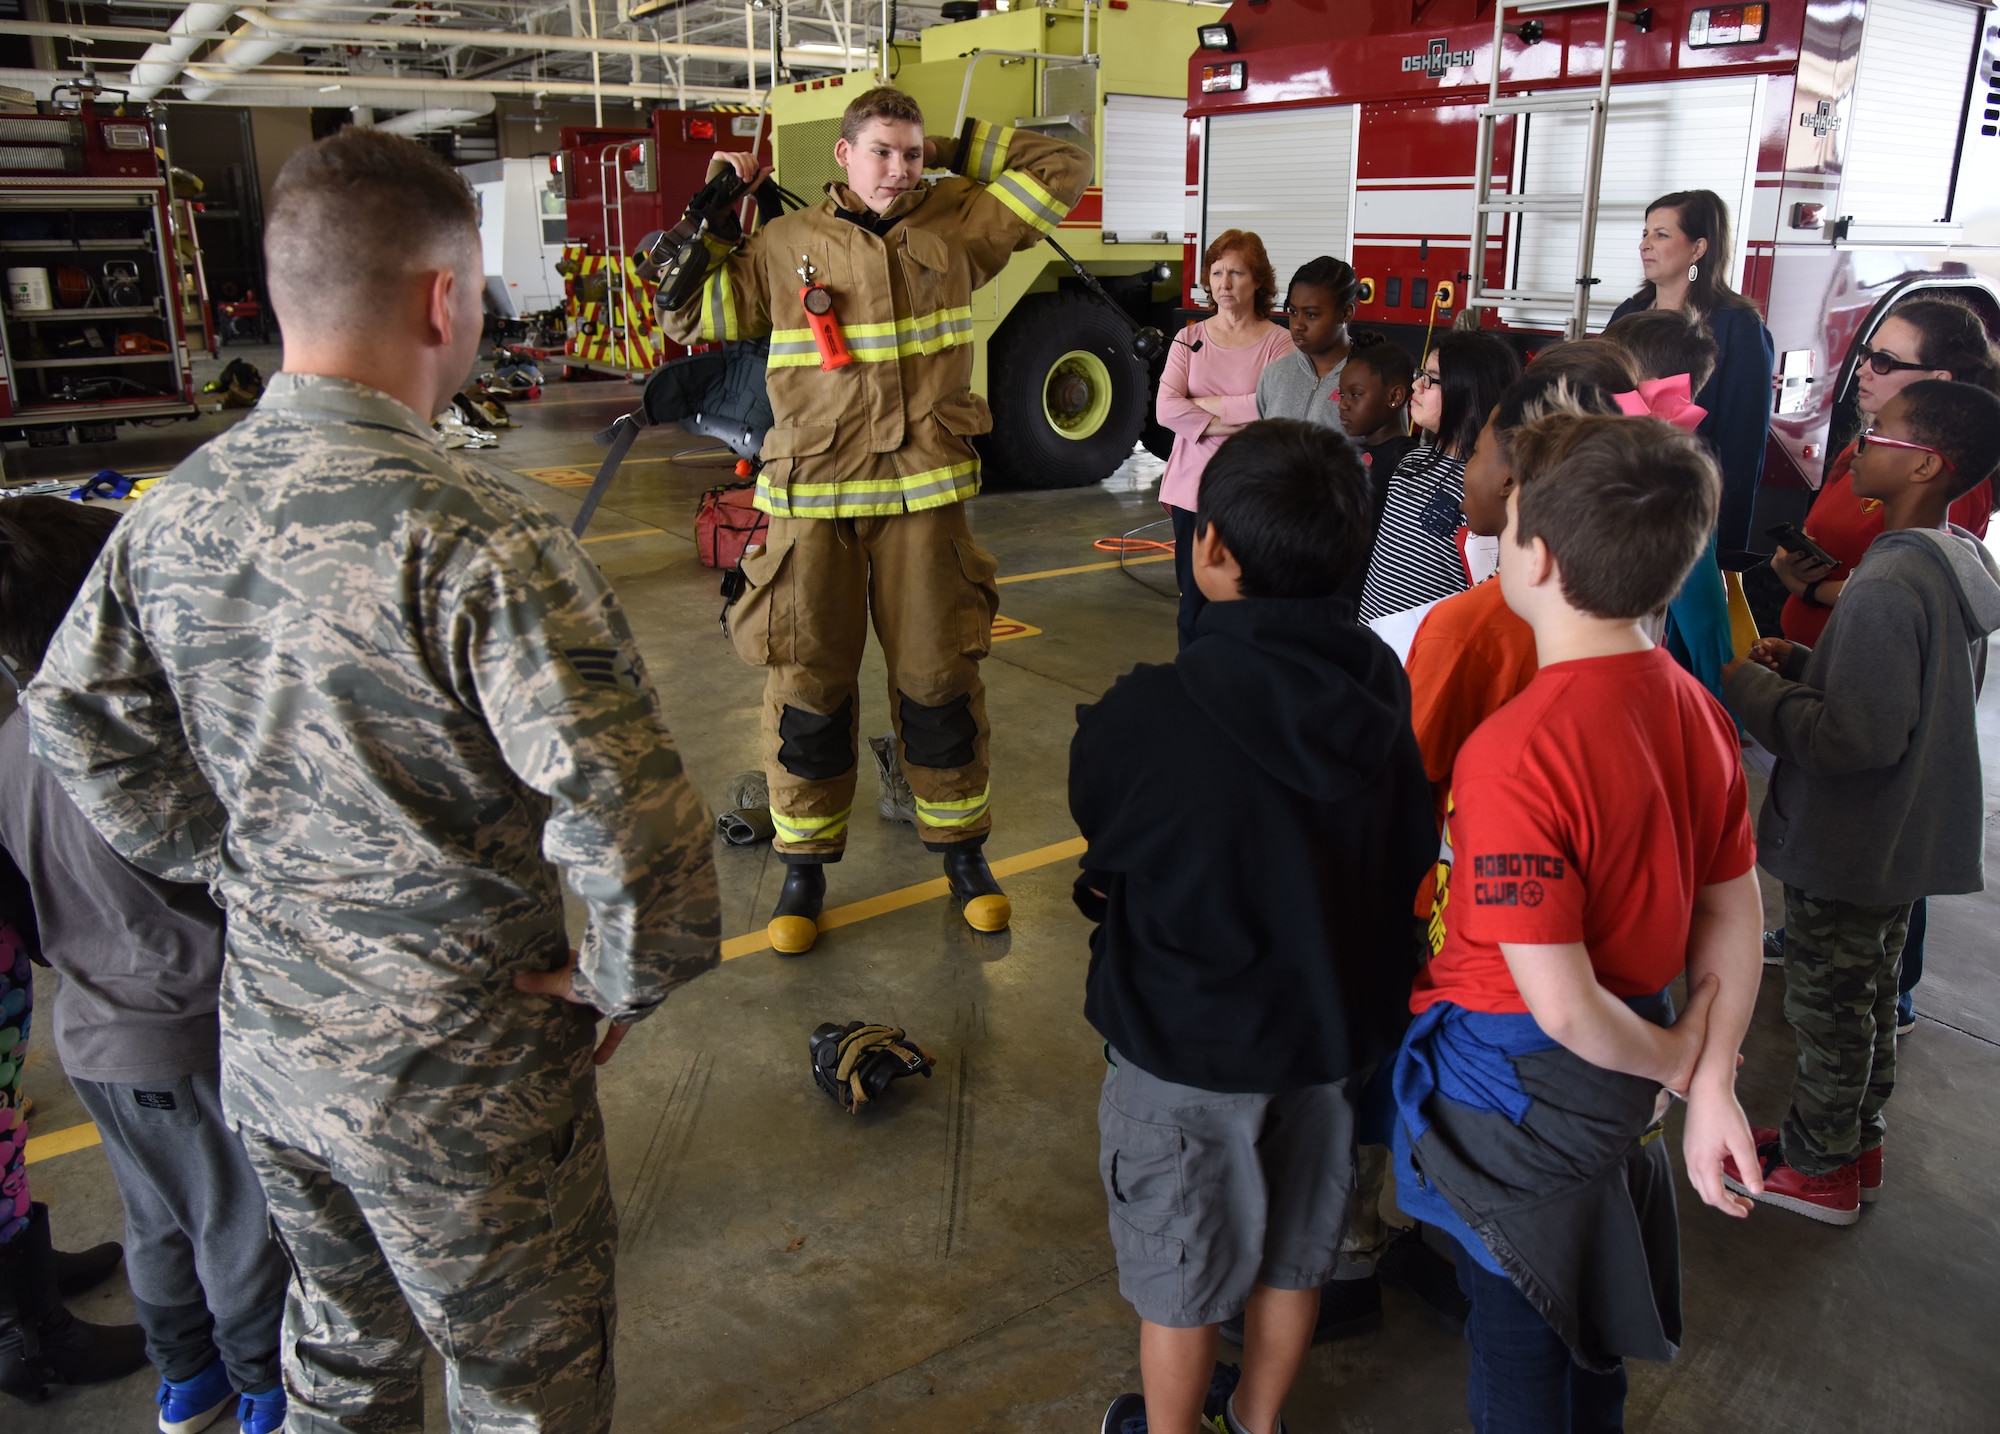 Airman 1st Class Kyle Tolle, 81st Infrastructure Division firefighter, demonstrates how to put on firefighter gear during Biloxi Career Exploration Day at the fire department Feb. 14, 2018, on Keesler Air Force Base, Mississippi. The school-aged children also toured the 334th Training Squadron, 335th TRS and the Trainer Development Center. (U.S. Air Force photo by Kemberly Groue)